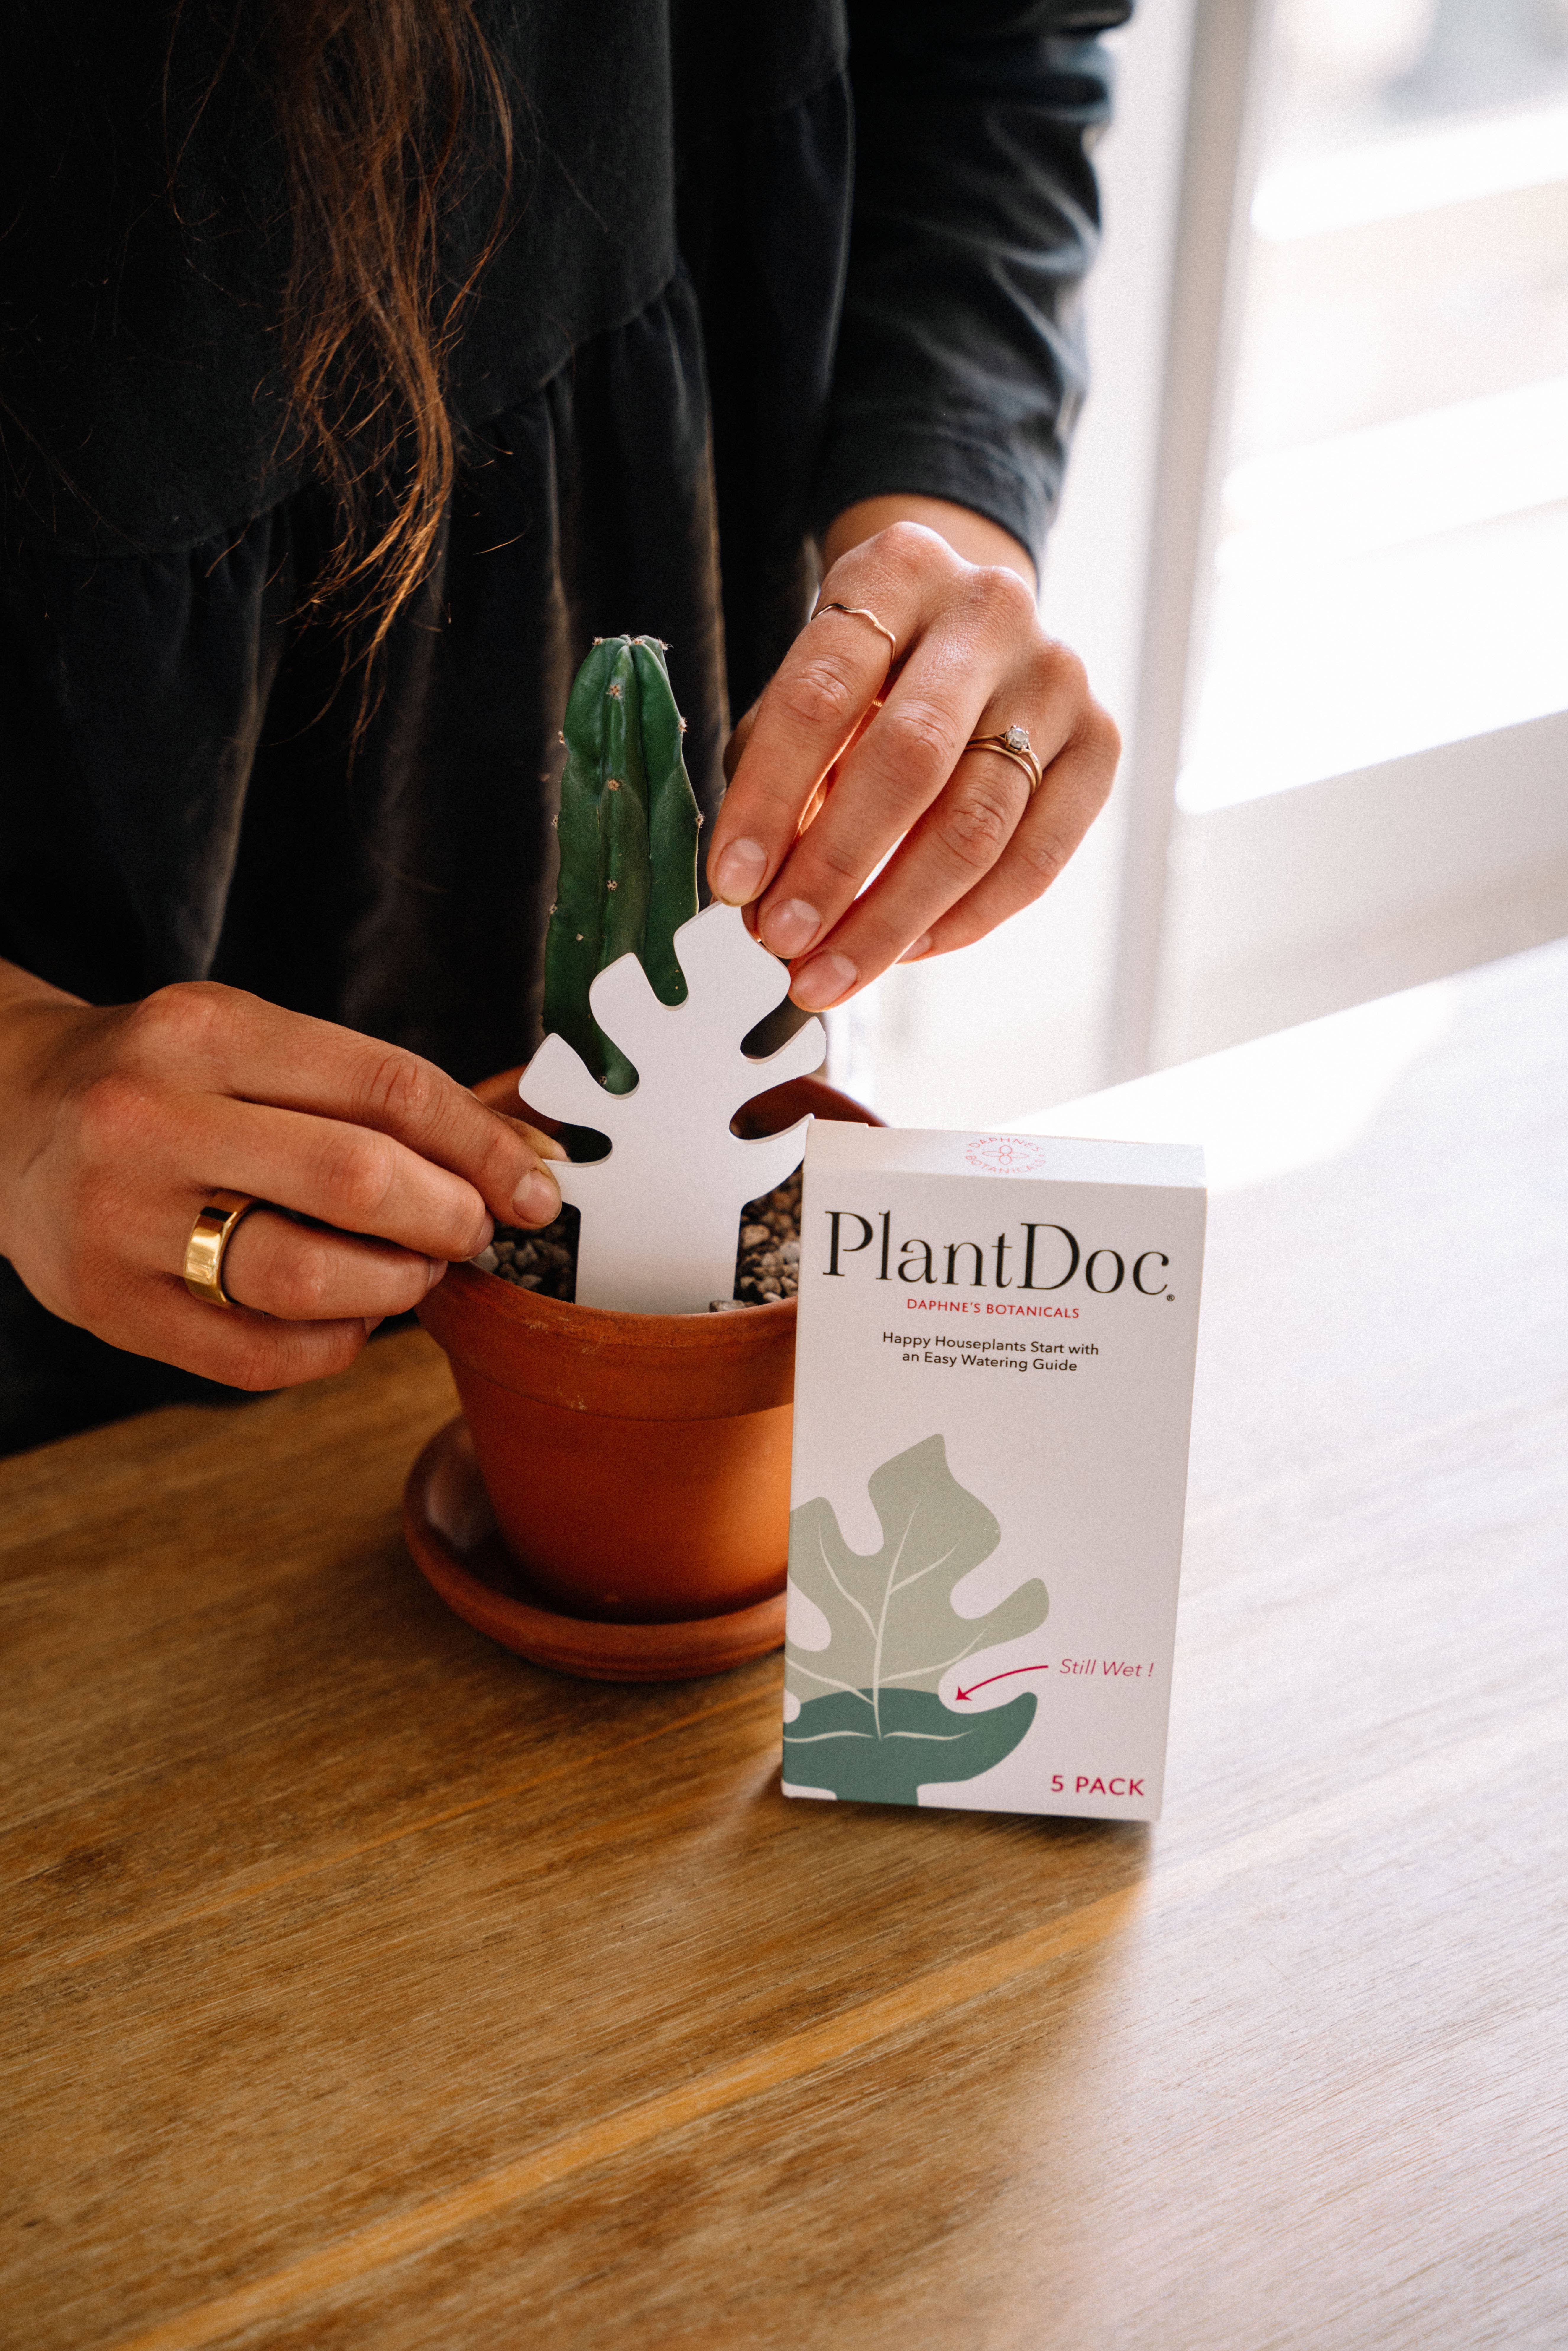 PlantDoc: Biodegradable Color-Changing Moisture Meter for Plants